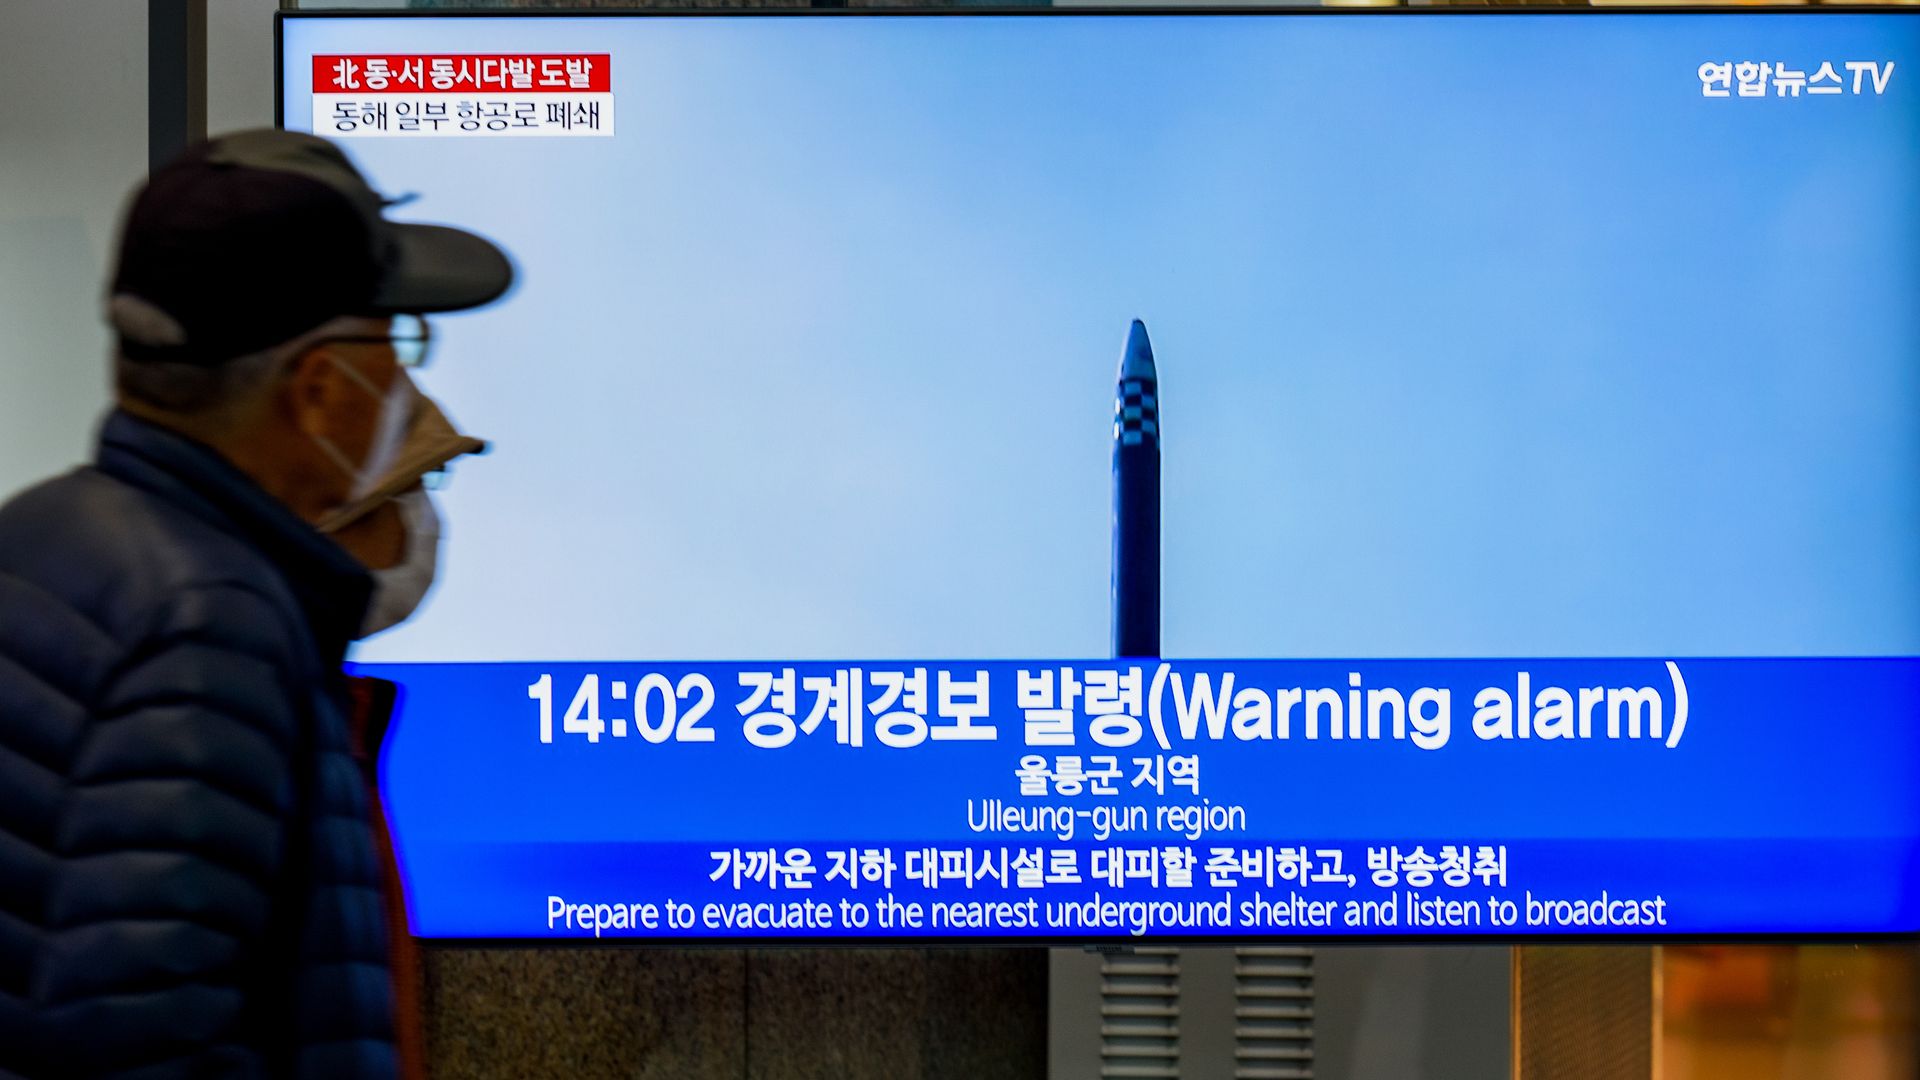 People watch a news broadcast flashing a warning alarm after a North Korean missle launch 